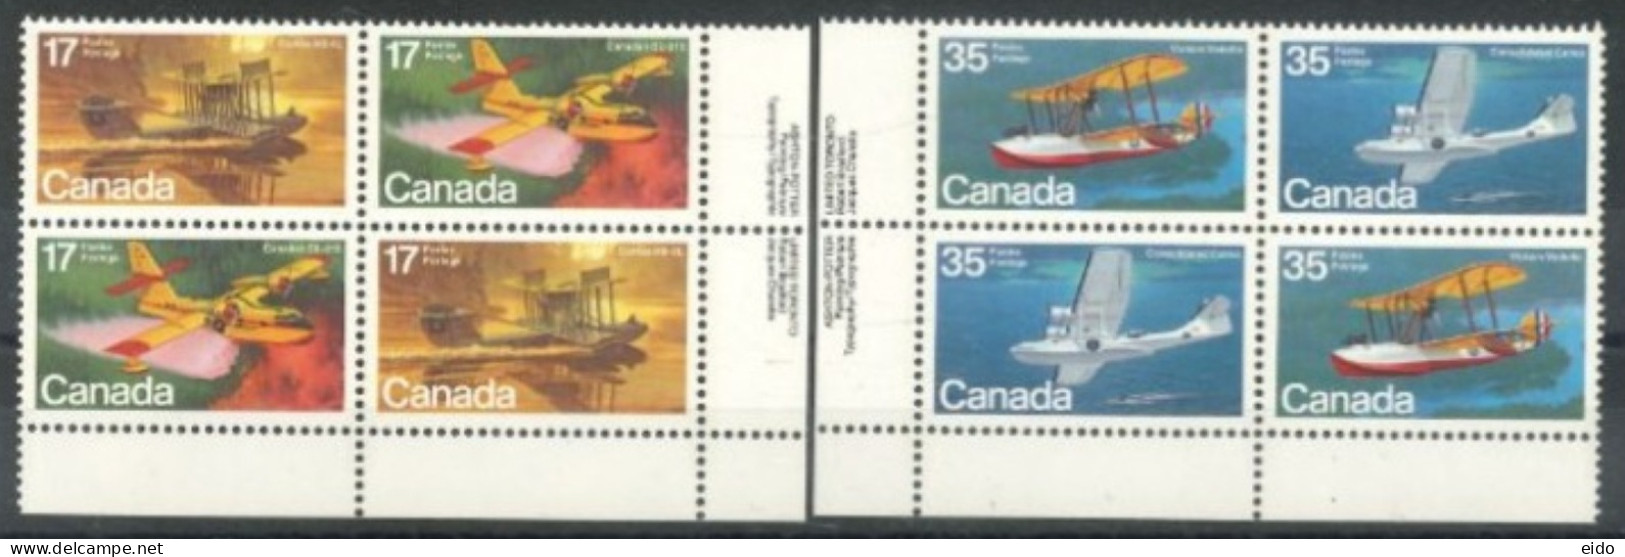 CANADA - 1979, CANADIAN AIRCRAFT (FIRST SERIES), FLYING BOATS STAMPS COMPLETE SET OF 4, 2 OF EACH, UMM (**). - Unused Stamps